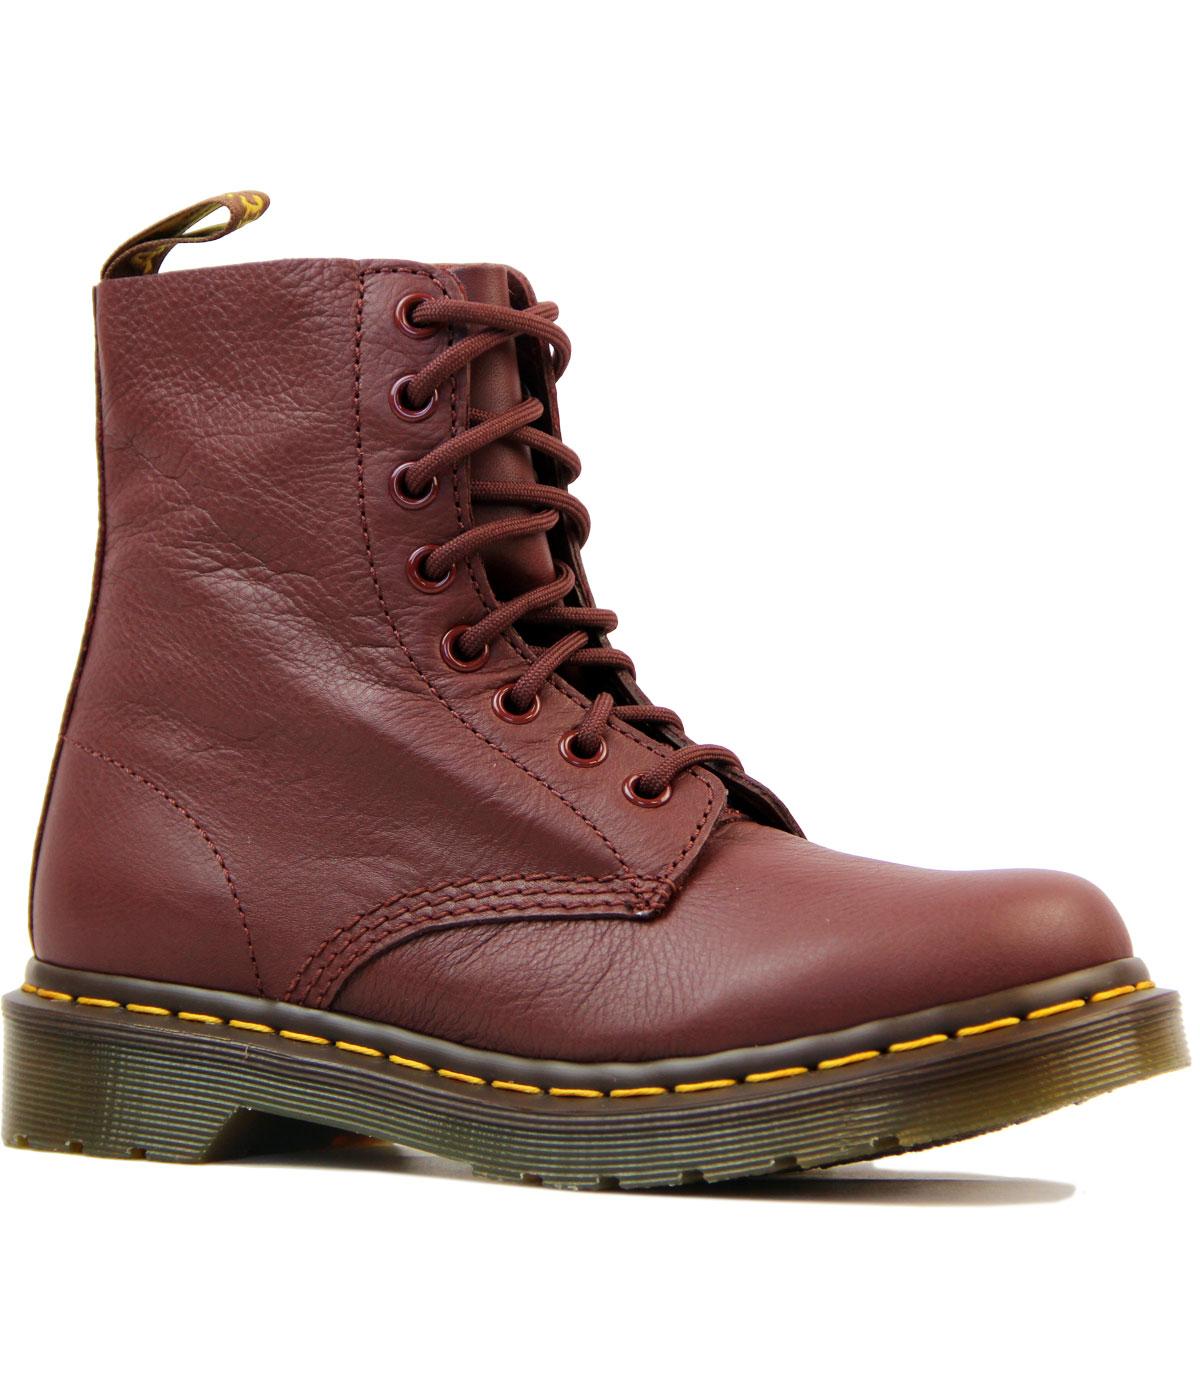 Pascal DR MARTENS Mod Napa Leather 8 Eyelet Boots